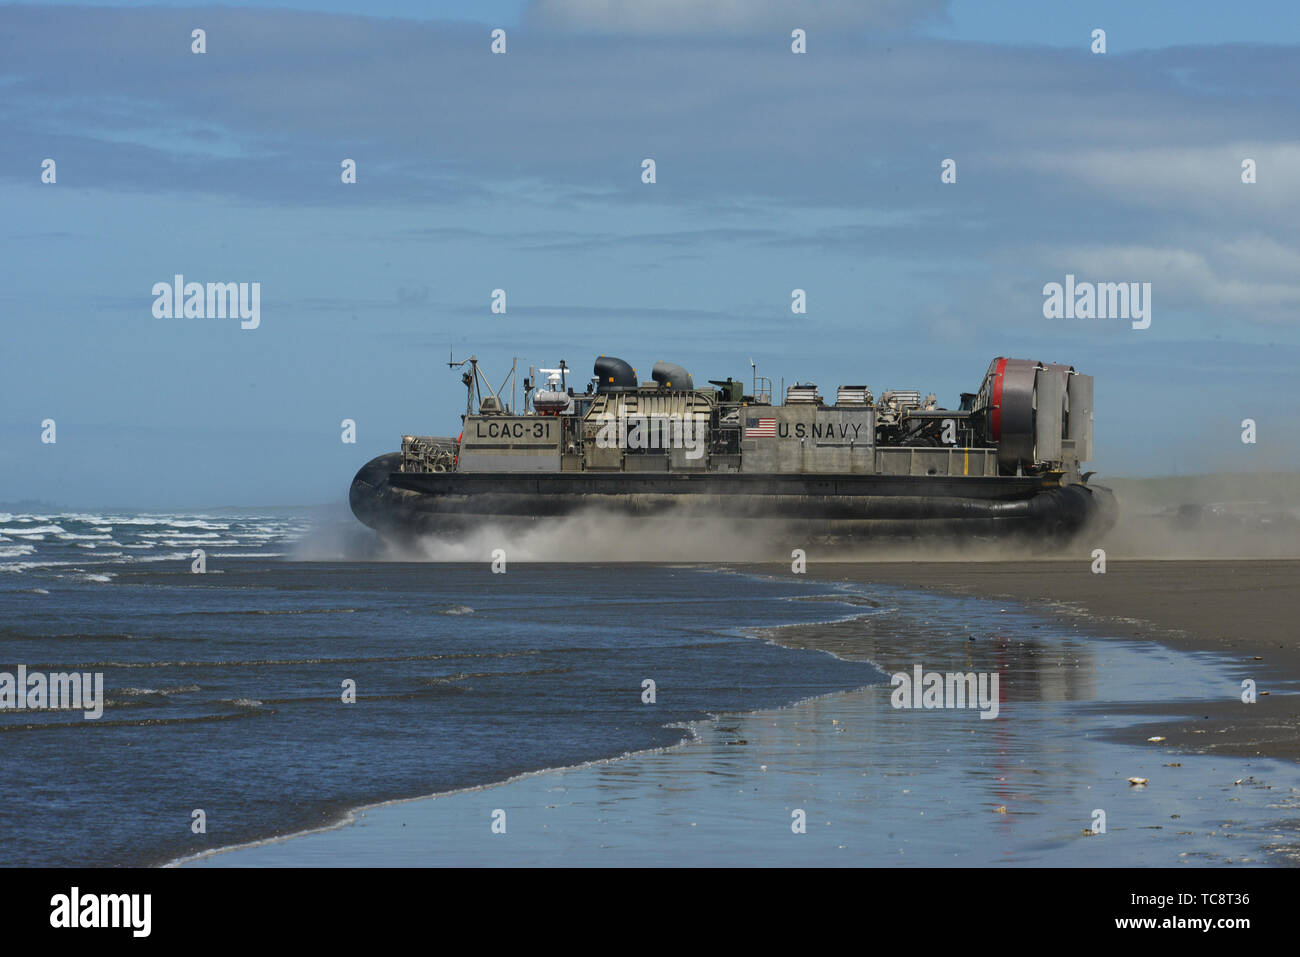 A U.S. Navy (Landing Craft Air Cushion) LCAC-31 leaves the shore at the Sunset Beach area near Warrenton, Oregon, June 3, 2019. In addition to the beach landings by the hovercraft vehicles, community leaders, emergency managers, military officials and other first responders toured the U.S.S. Anchorage to learn more about the Navy capabilities to assist in mass casualty scenarios.  (National Guard photo by John Hughel, Oregon Military Department) Stock Photo